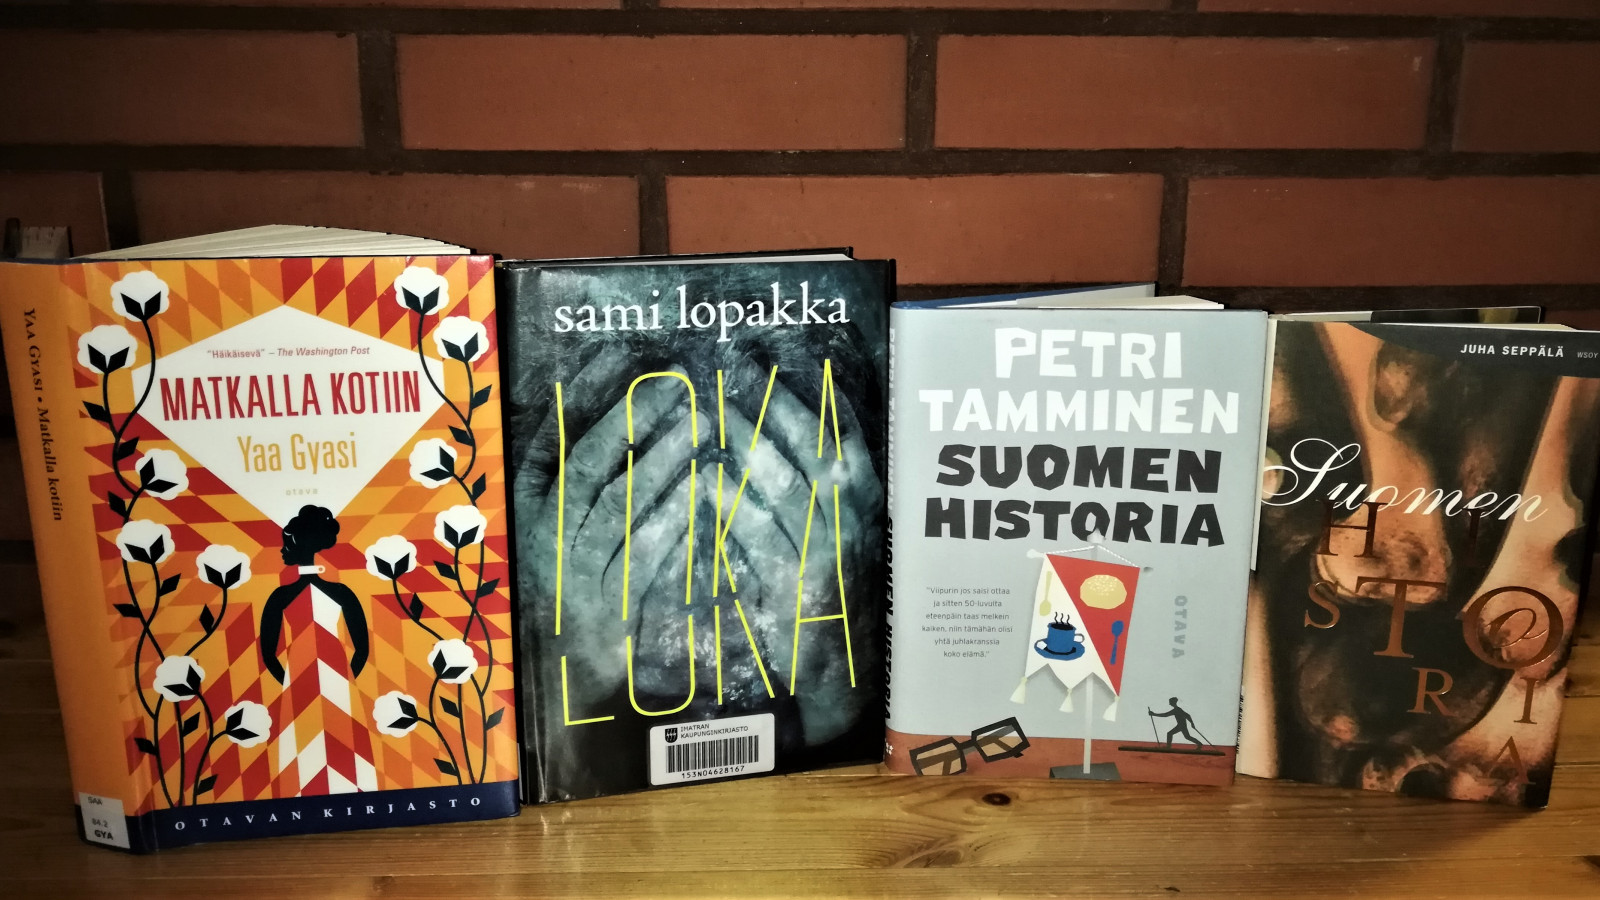 From the reading circle | the city of Imatra